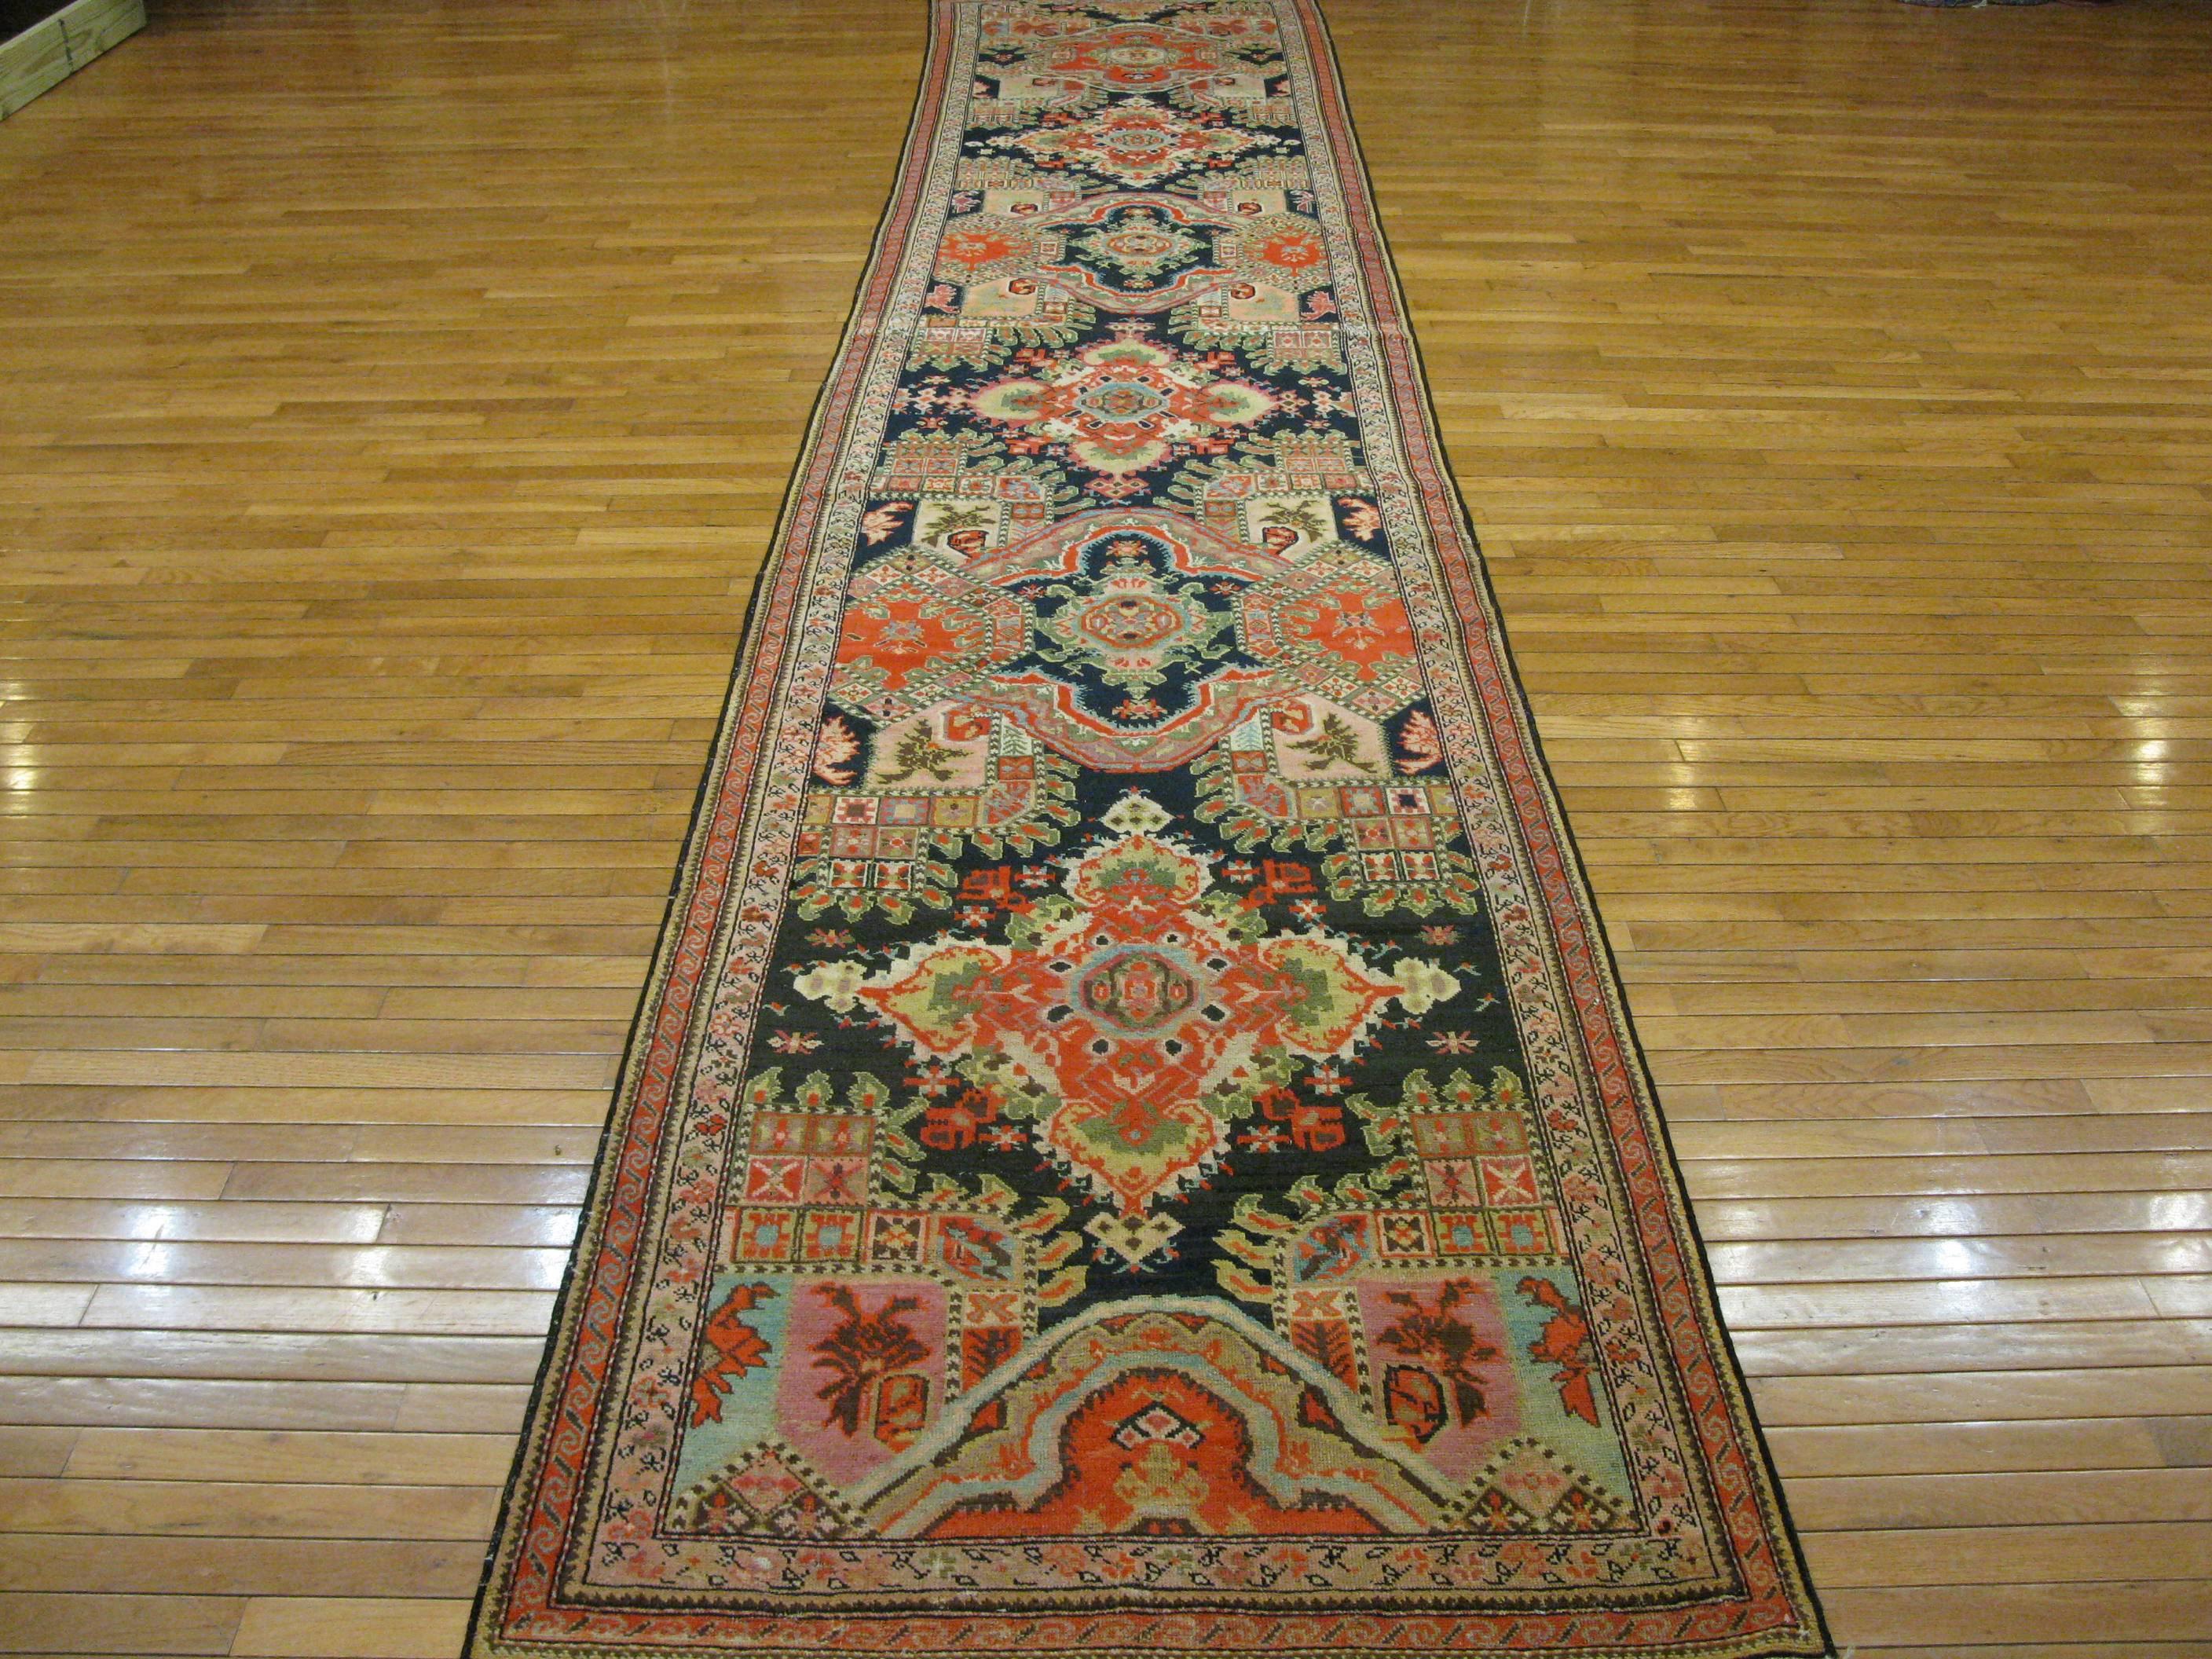 This is a beautiful hand-knotted long antique Caucasian Karabagh runner rug made with all wool and natural dyes in rich colors that would bring any hallway to life. It measures 3' 3